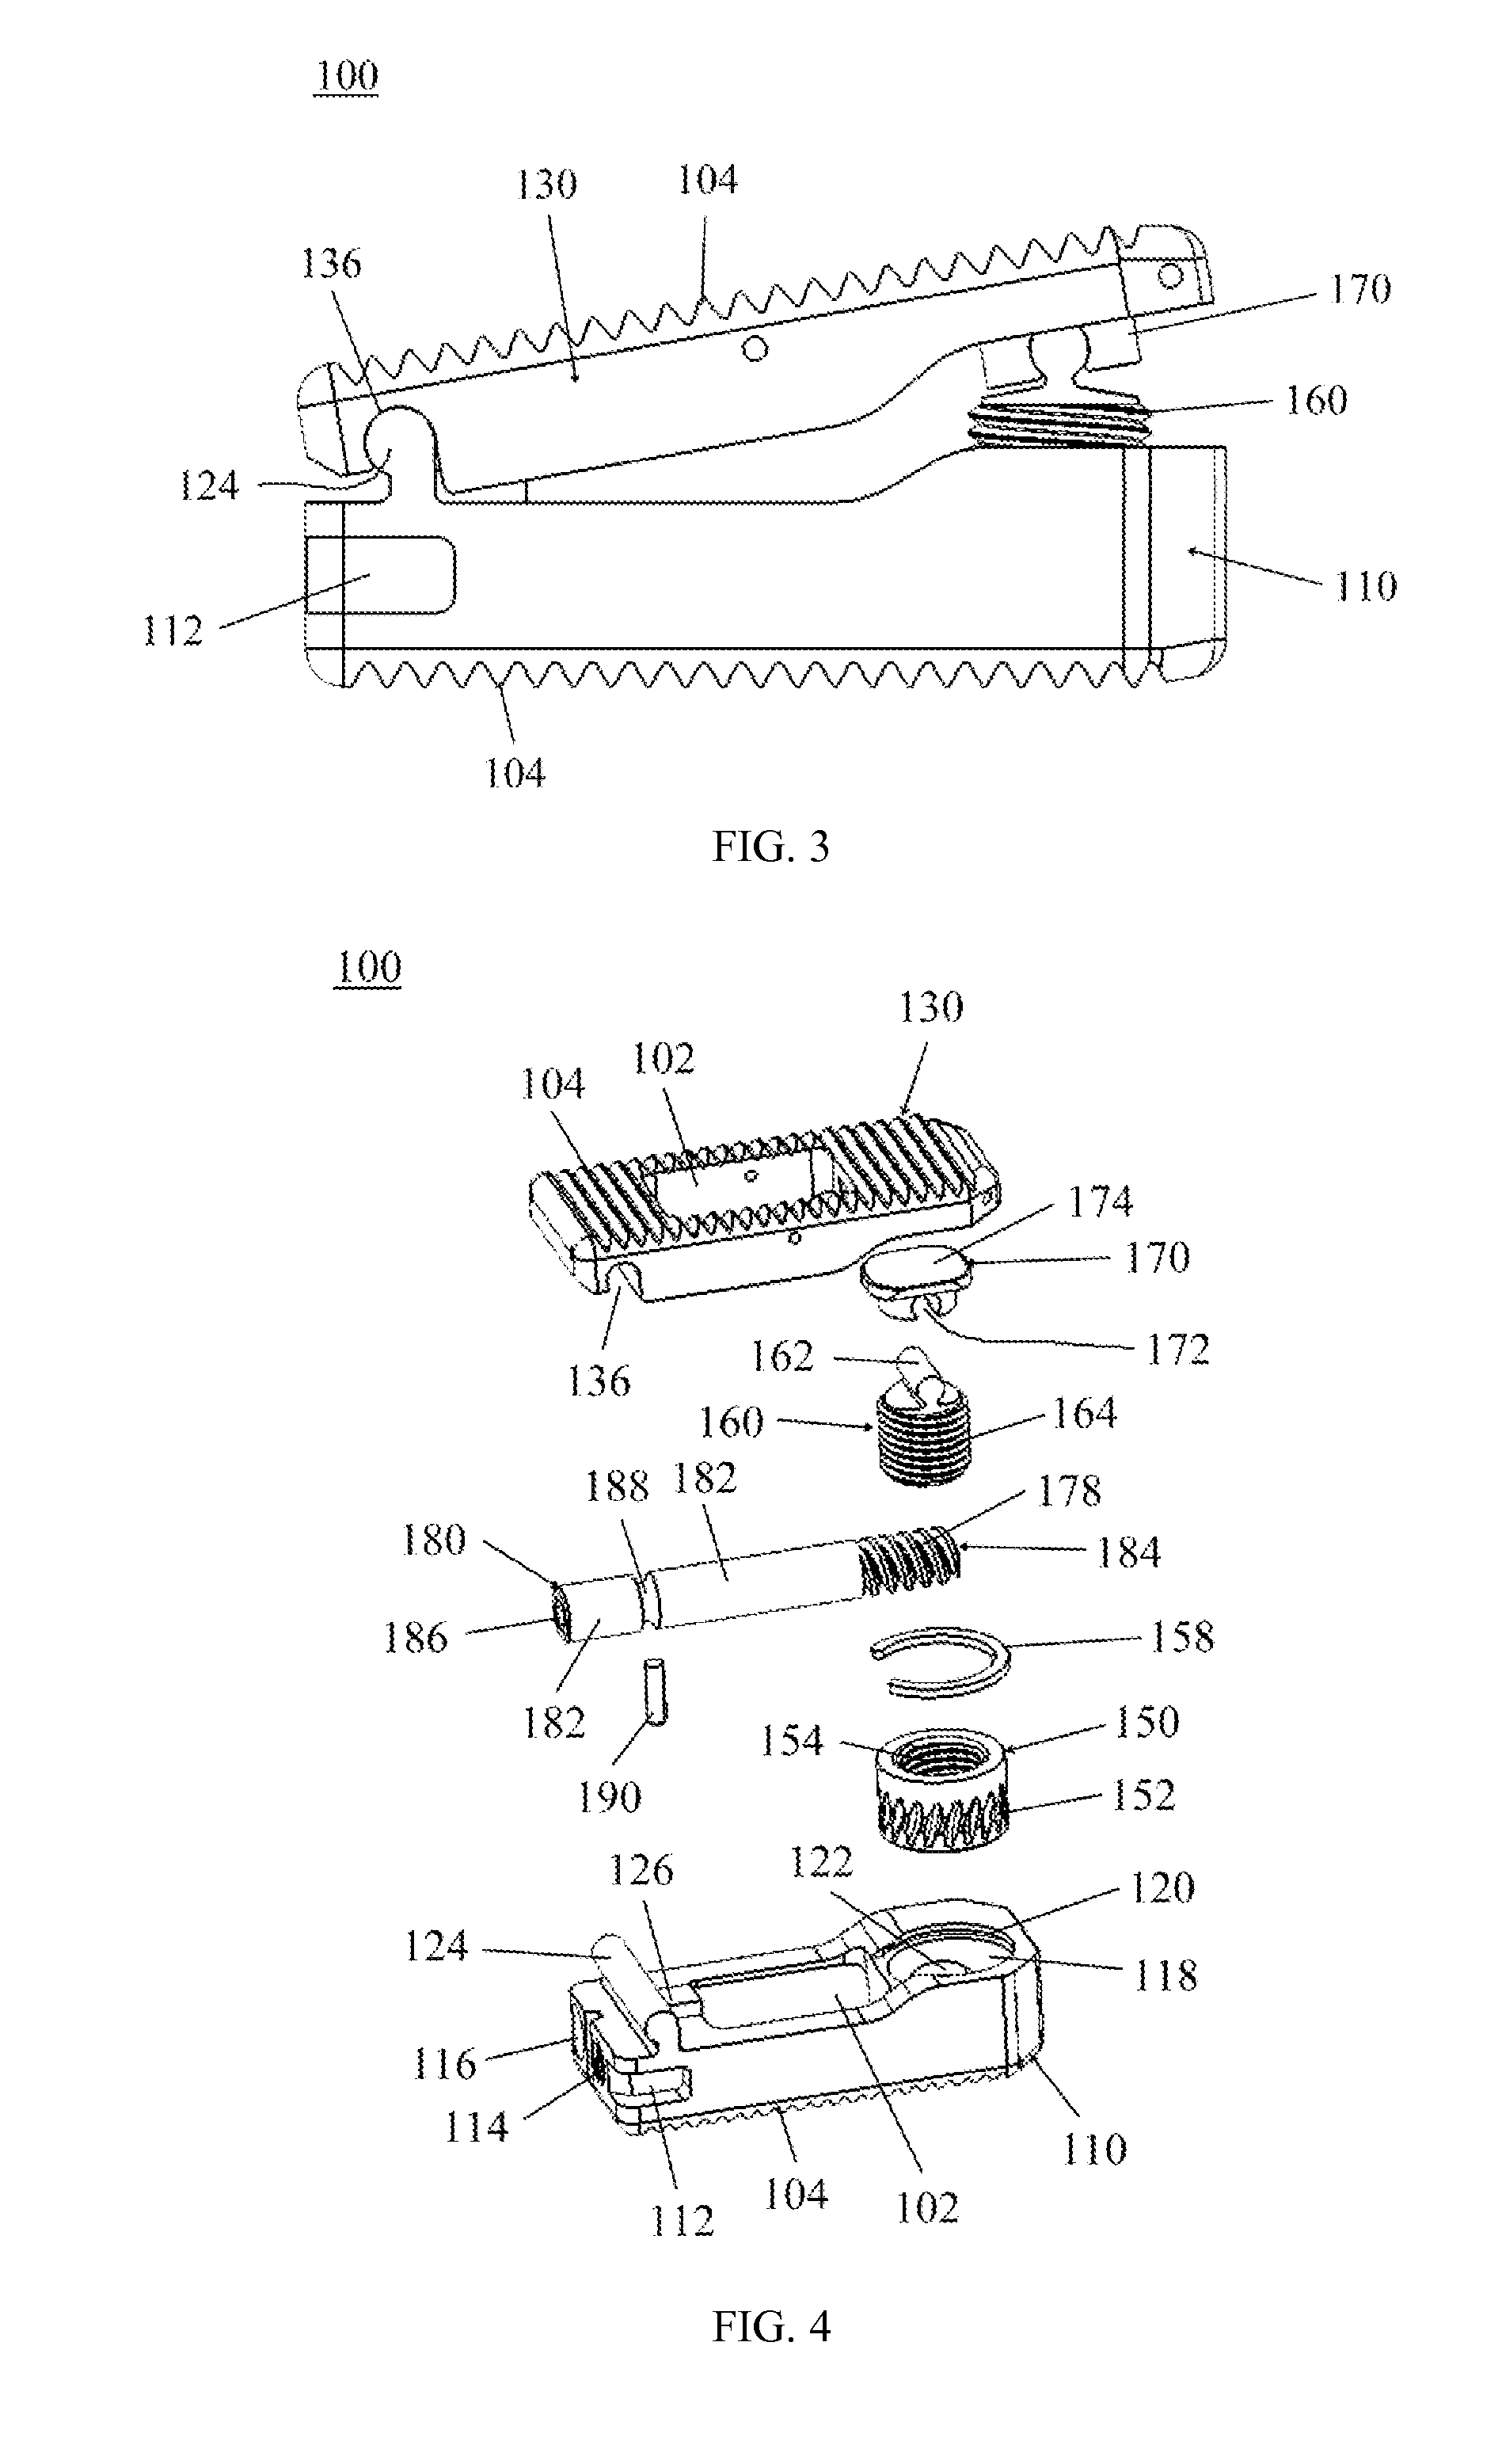 Adjustable interbody fusion device and method of use